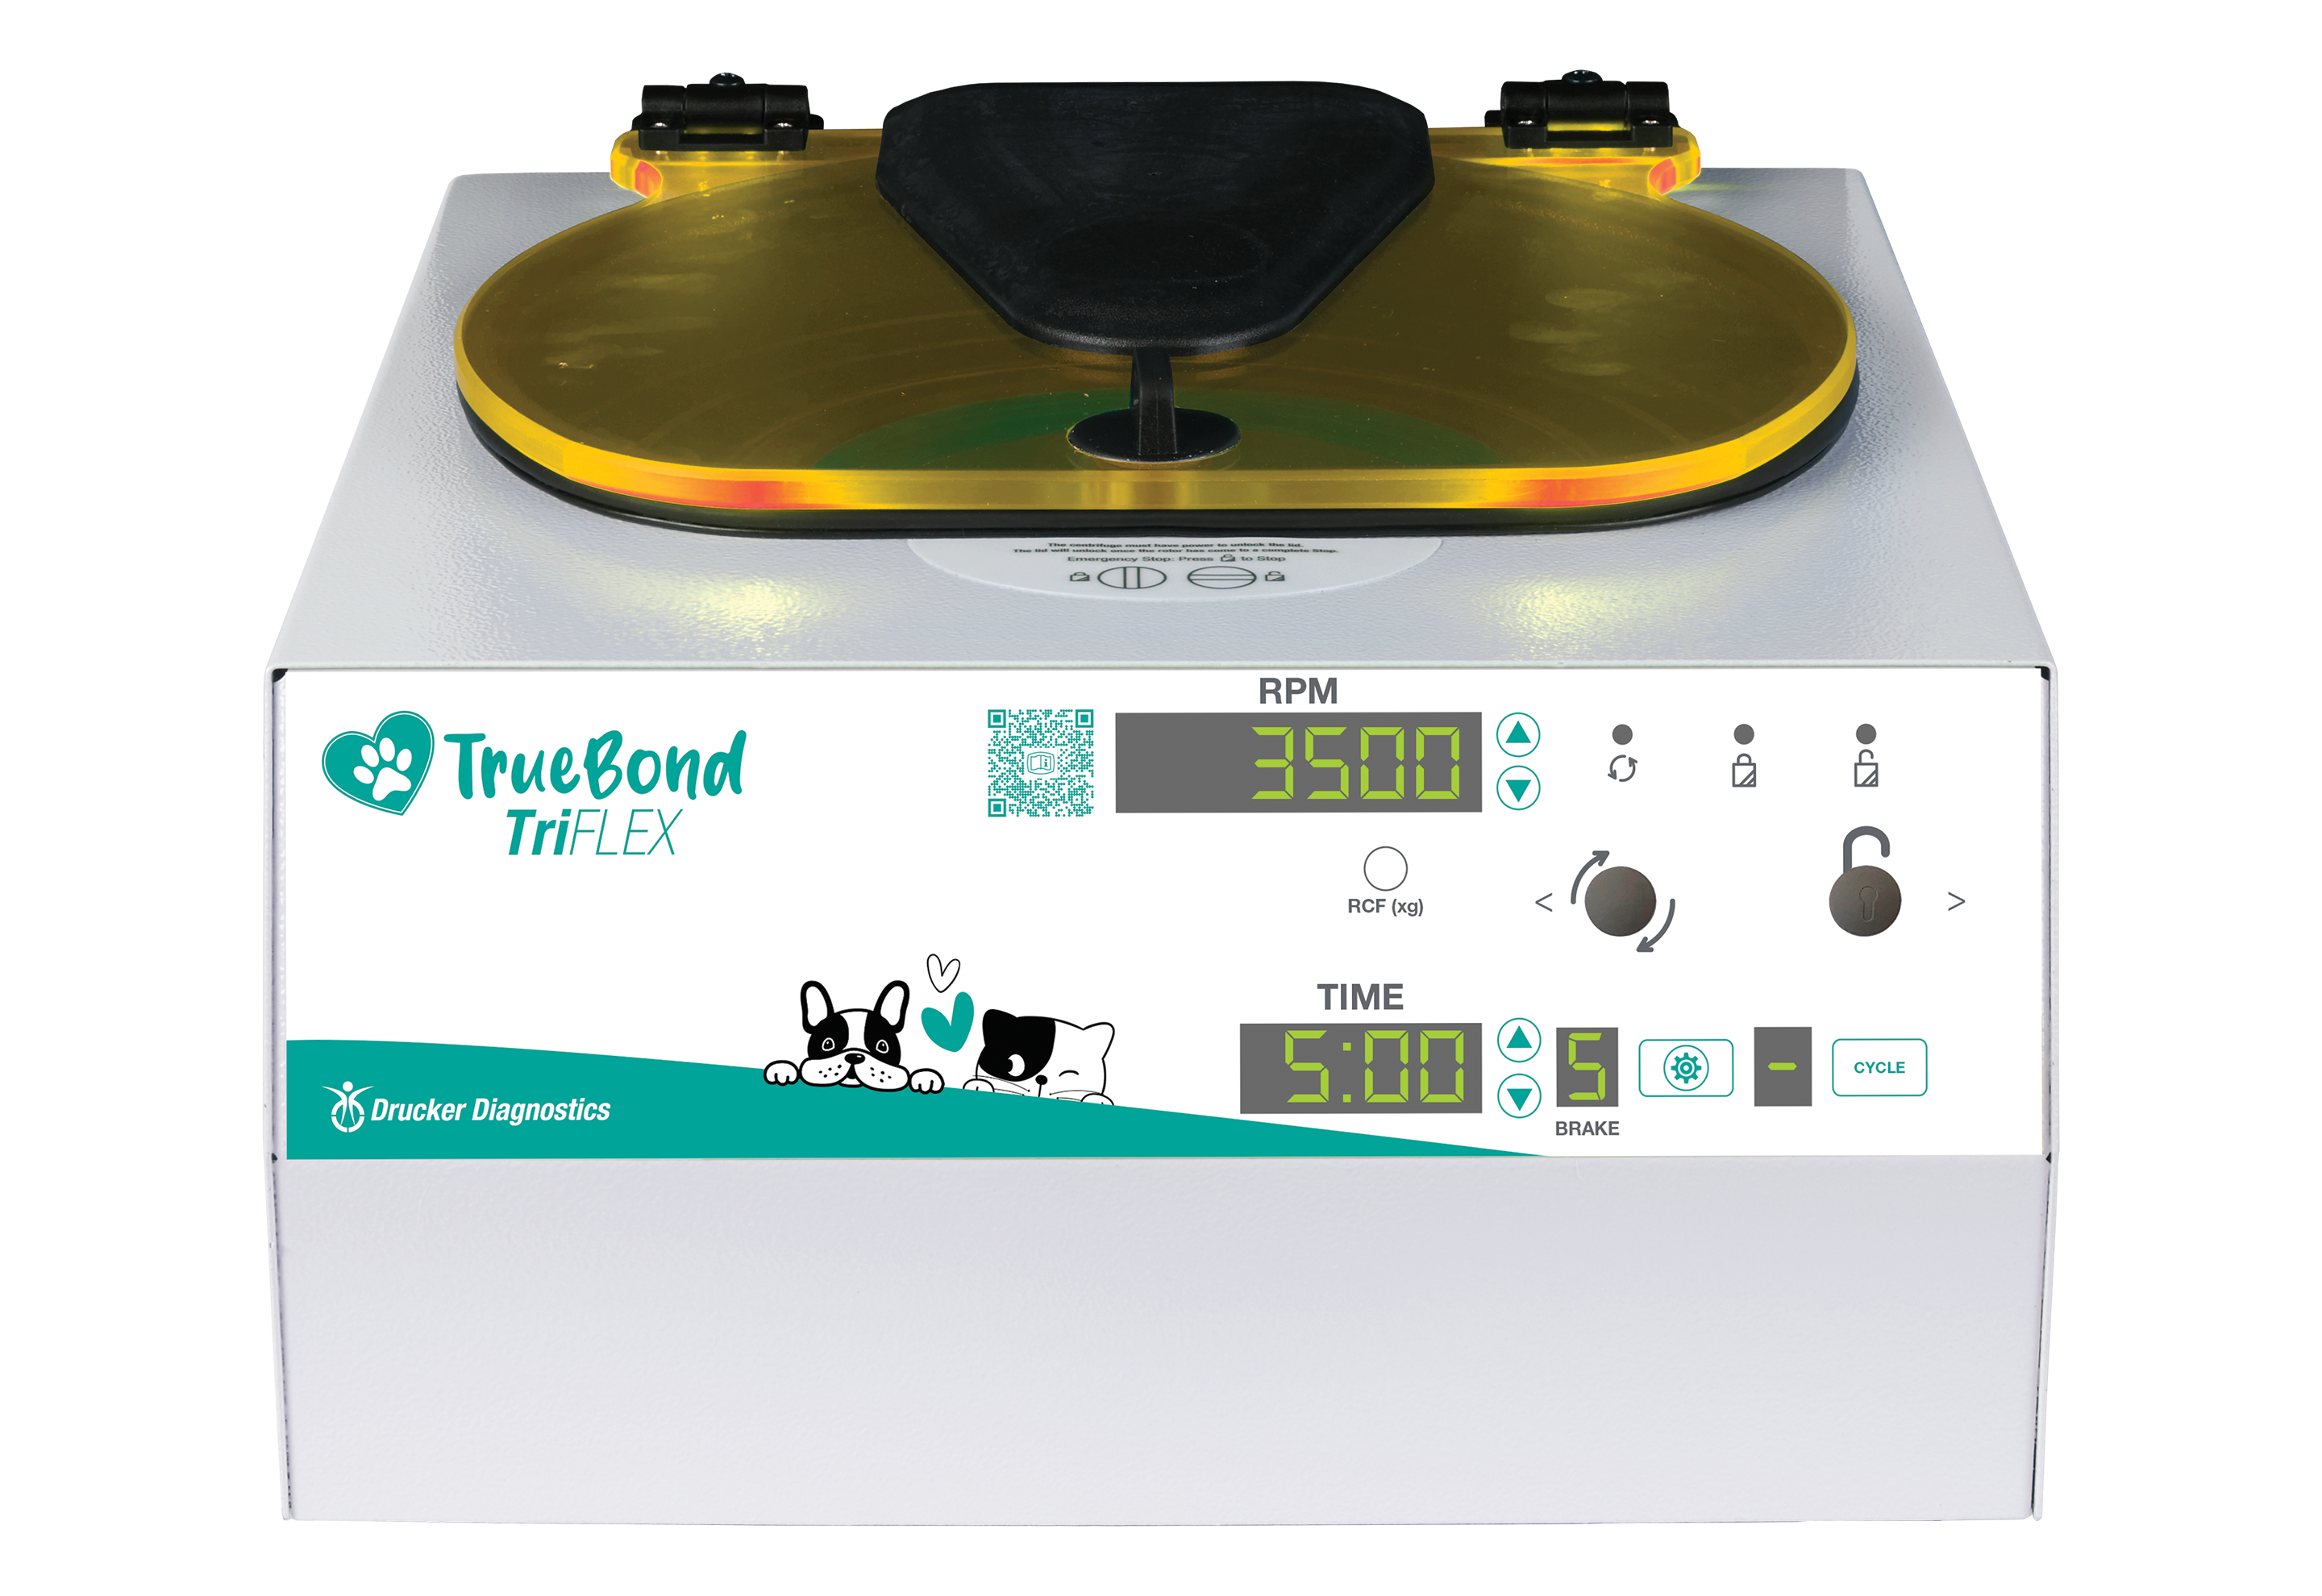 TrueBond TriFLEX animal health centrifuge, seen from the front with digital displays and controls illuminated and status tracker lid lighting running